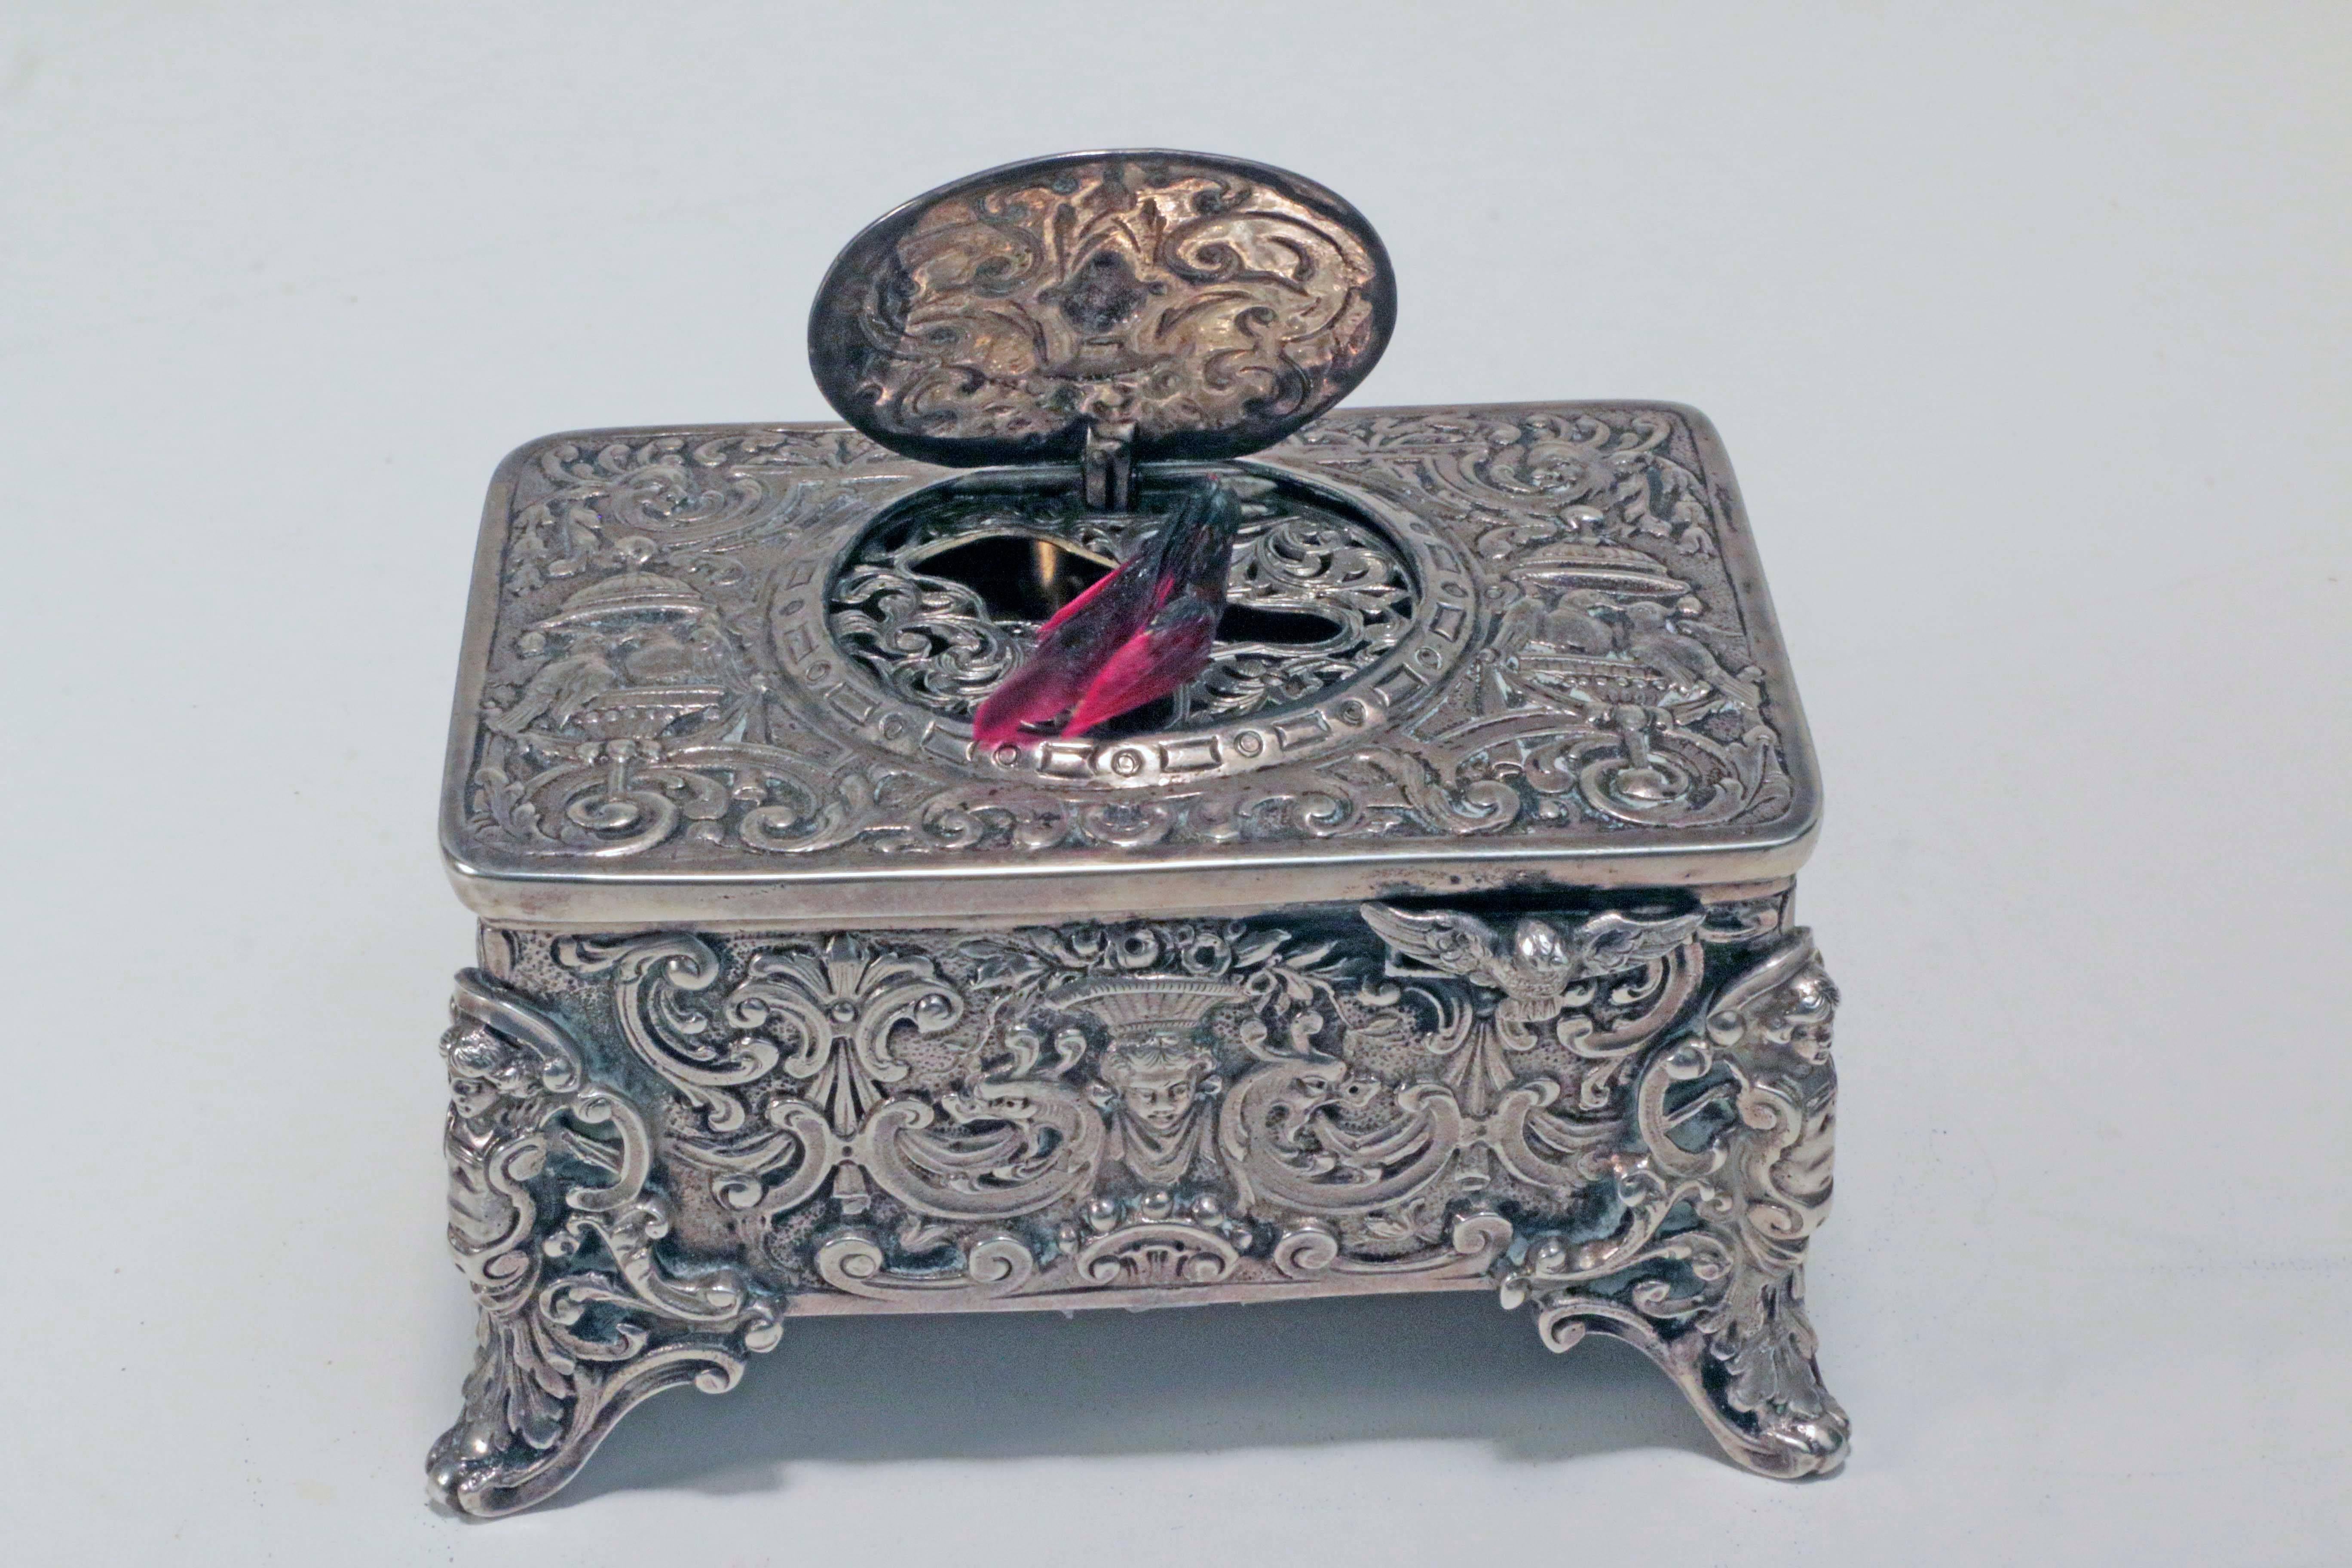 Early 20th century German silver singing bird box by Karl Grisebaum, of typical form. The rectangular box cast with scrolls and caged birds. The central oval cover rising to reveal a tweeting and preening song bird.

Karl Grisebaum's company